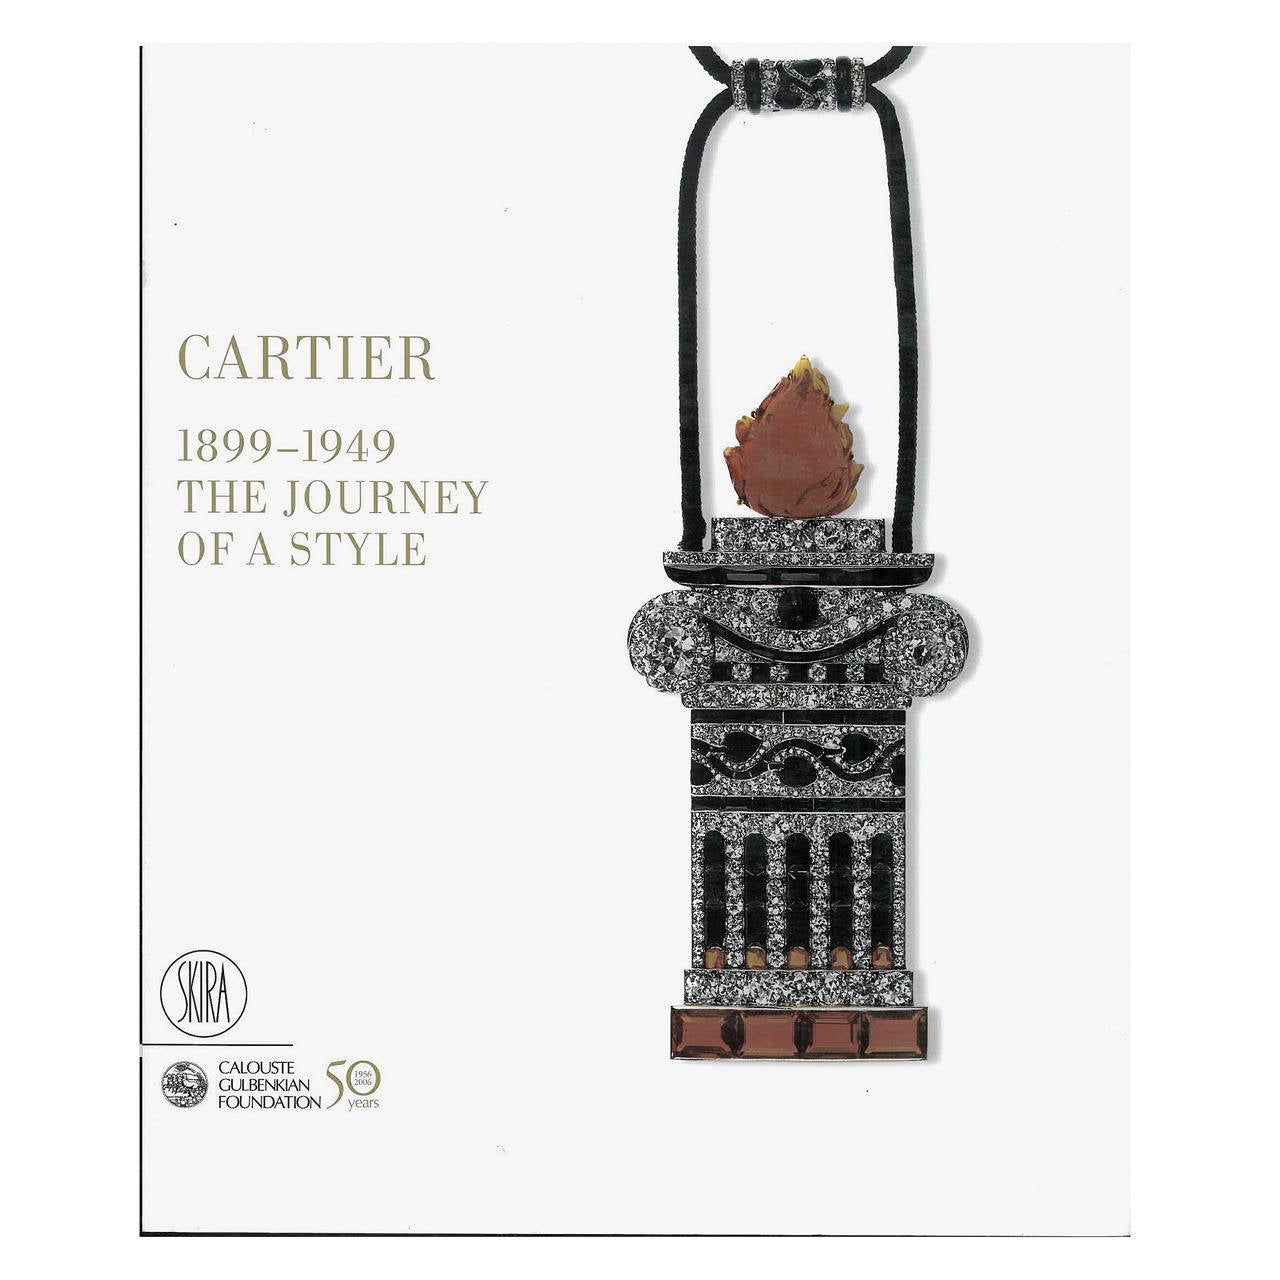 Book of CARTIER 1899-1949 The Journey of a Style